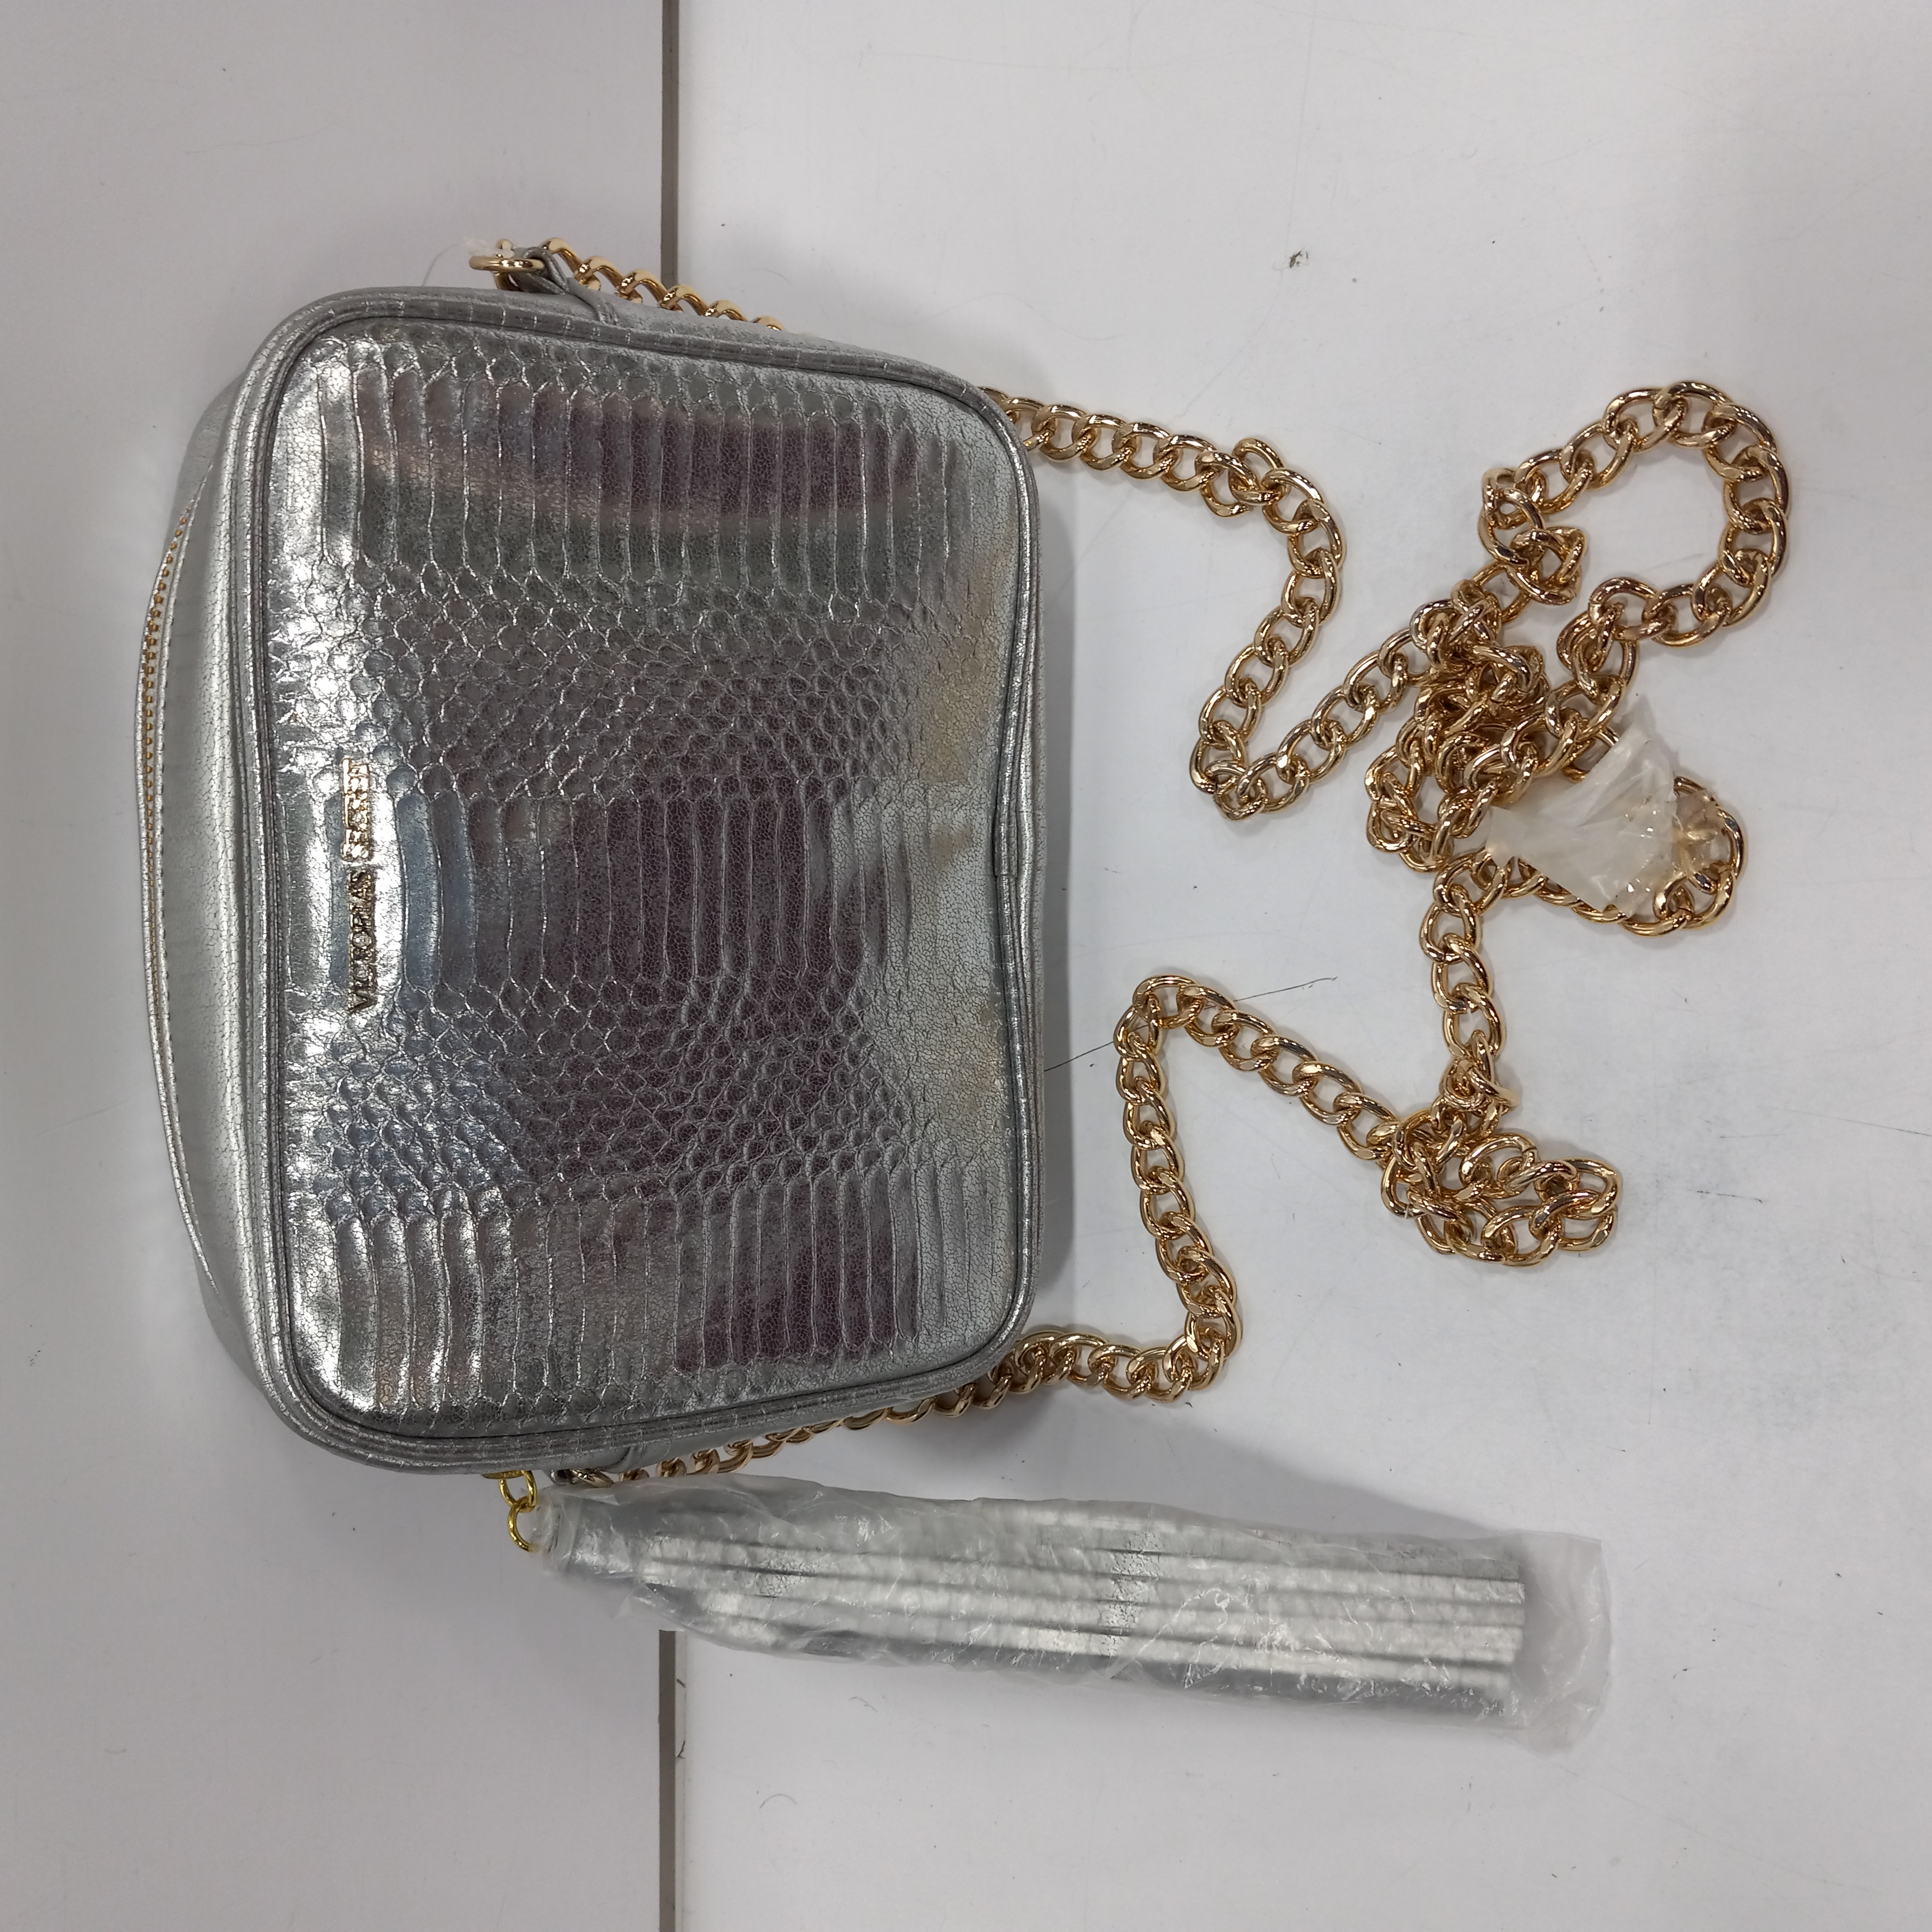 Buy the Victoria's Secret Silver Crossbody Clutch Bag with Gold Chain Strap  and Tassel Zipper Pull